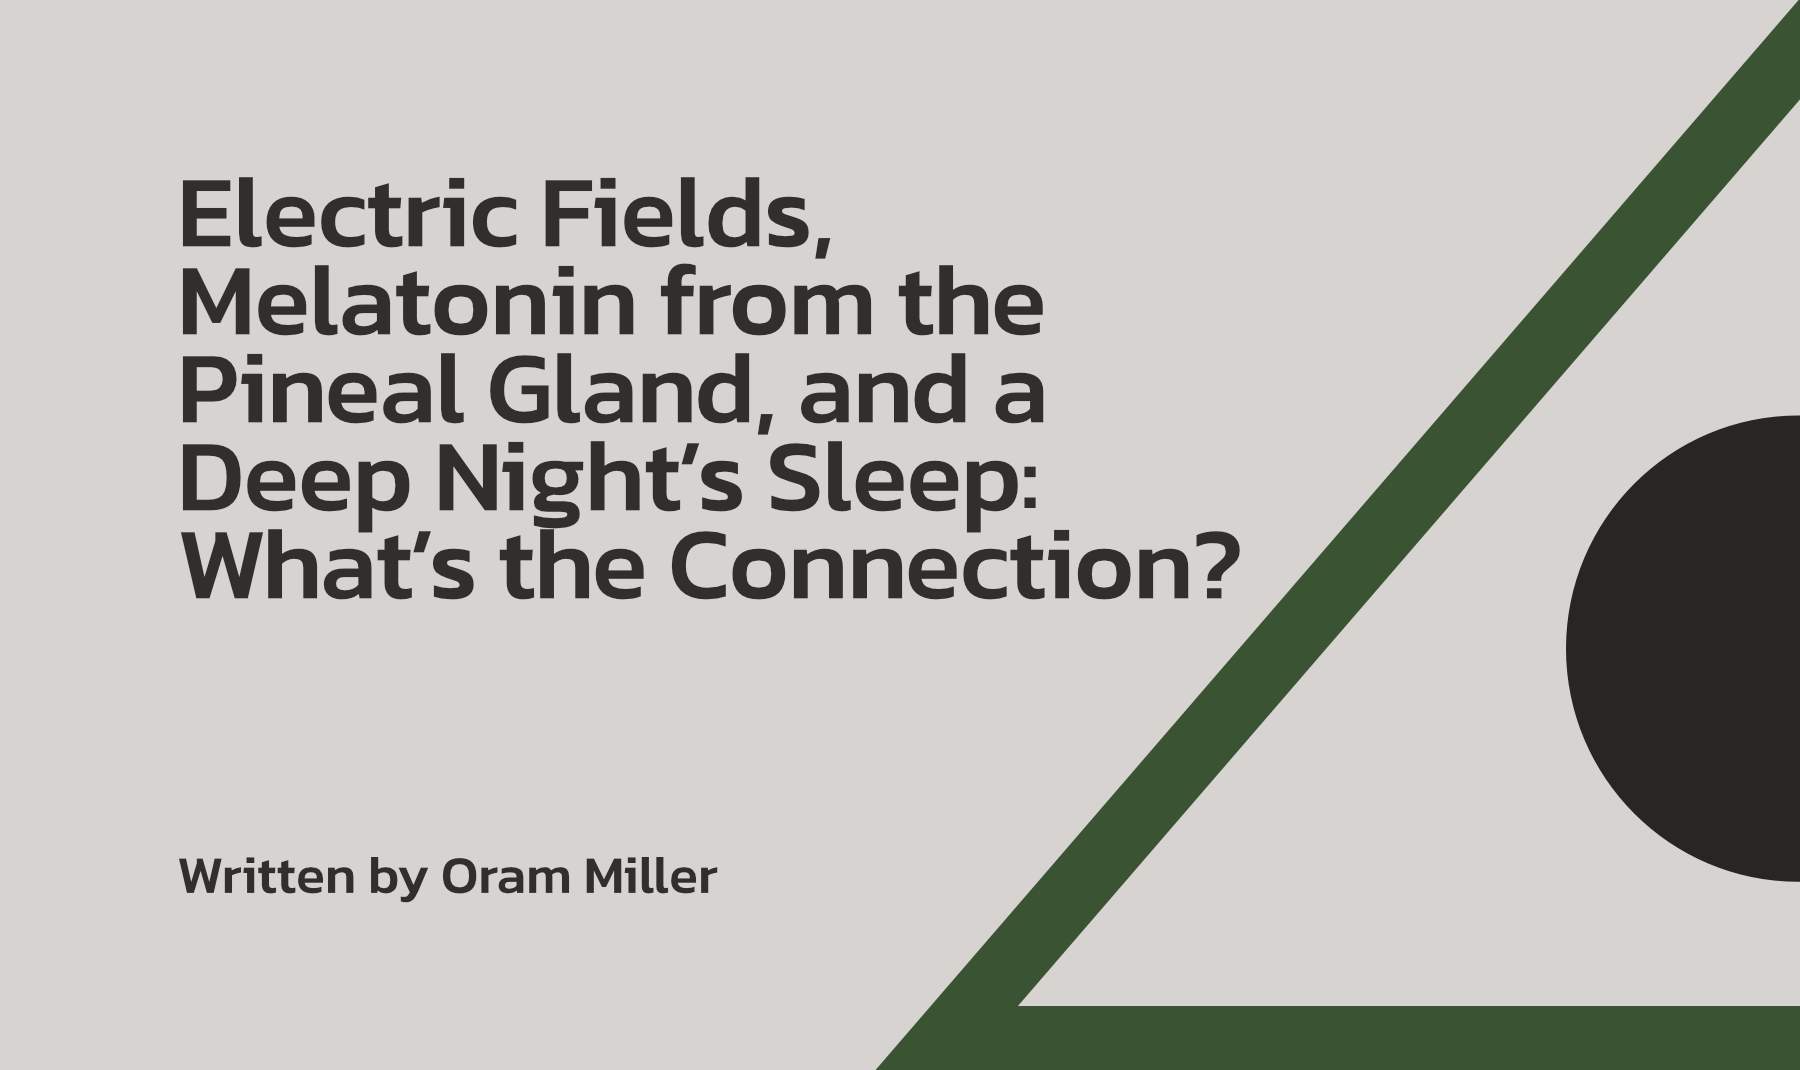 Electric Fields, Melatonin from the Pineal Gland, and a Deep Night’s Sleep: What’s the Connection?